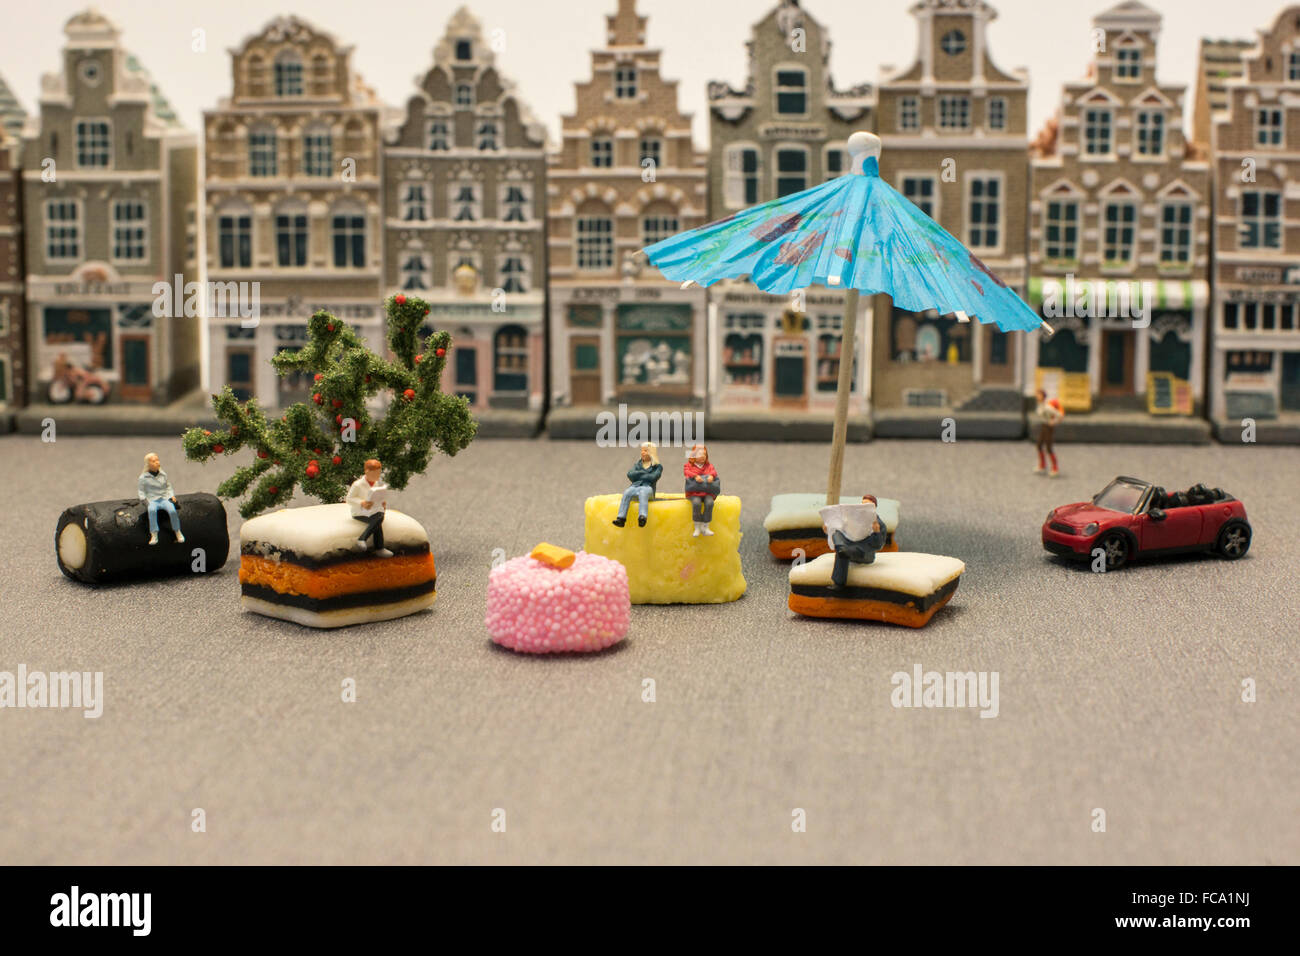 sweet relax on the village square by little people Stock Photo